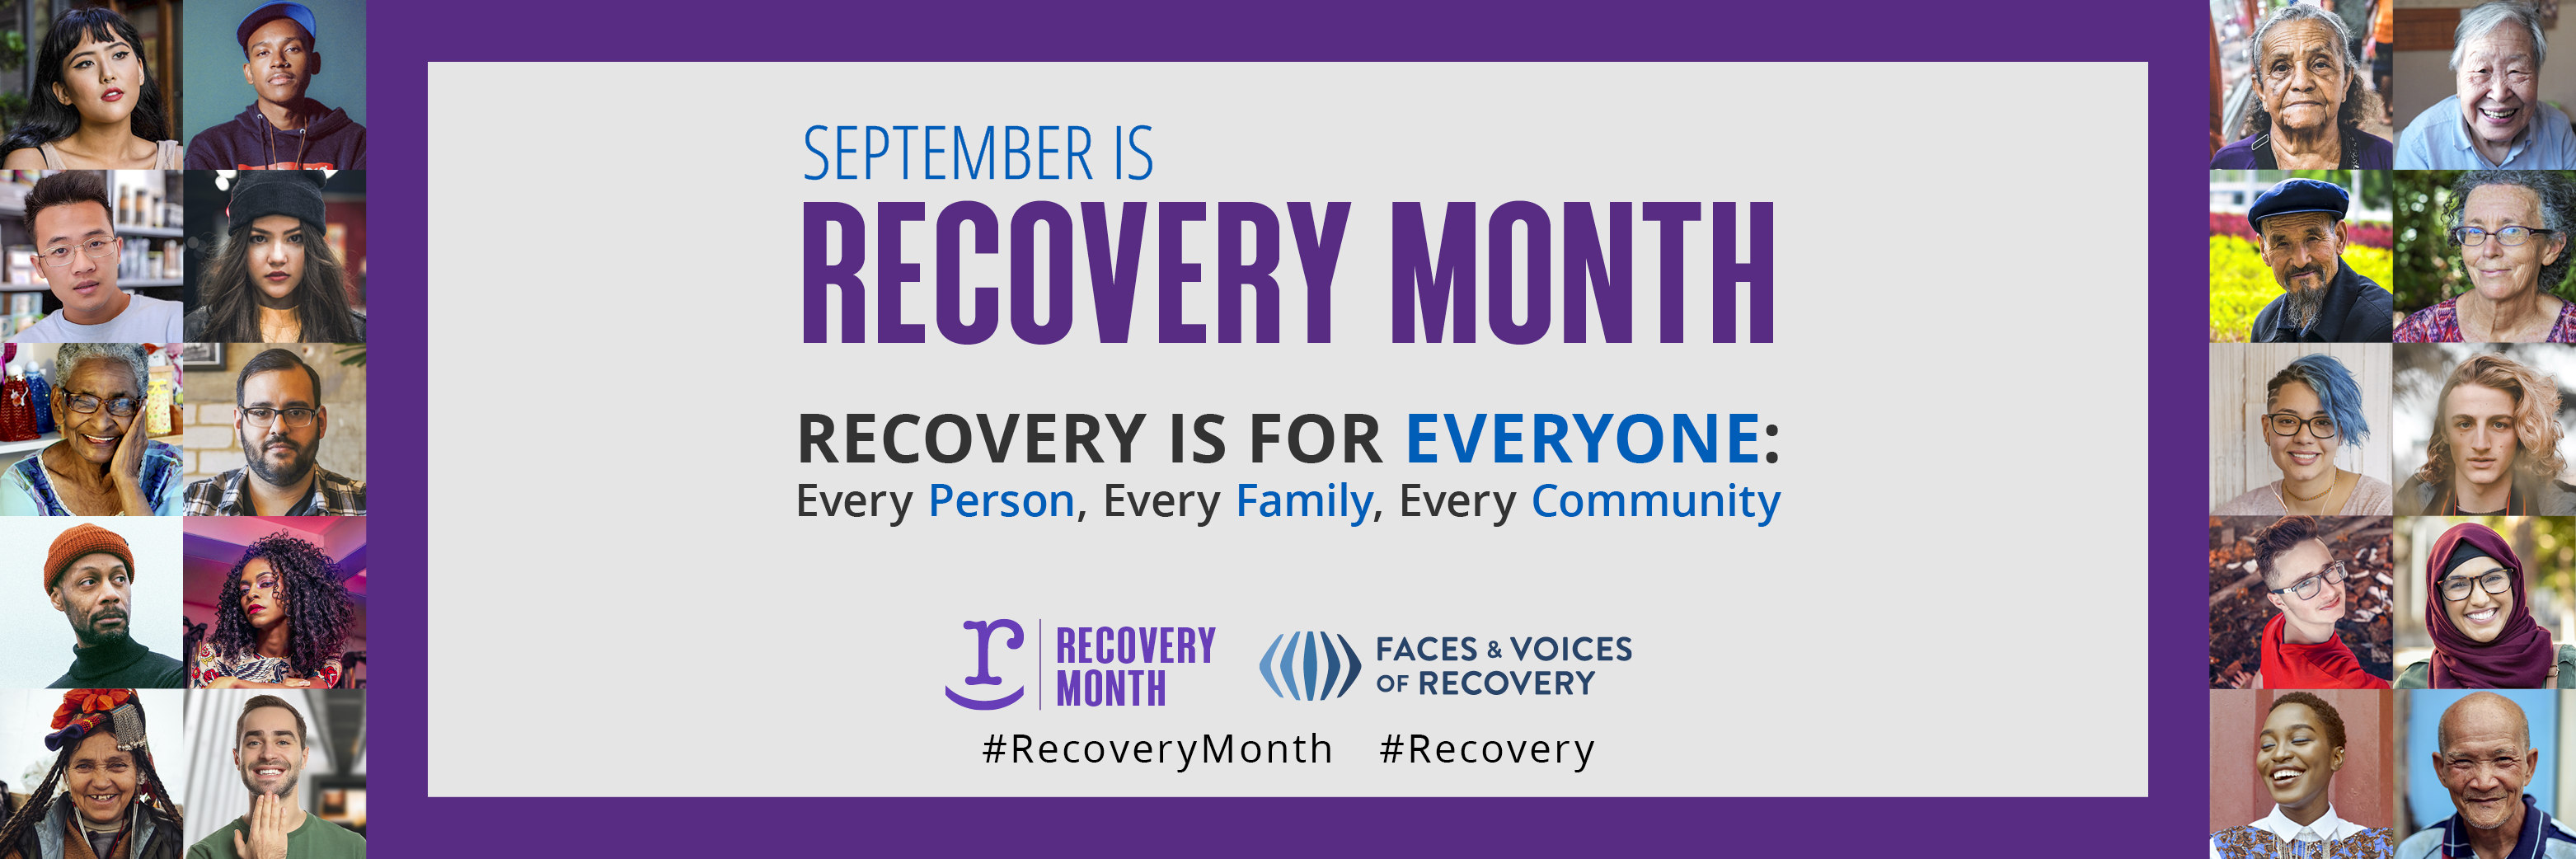 Recovery month